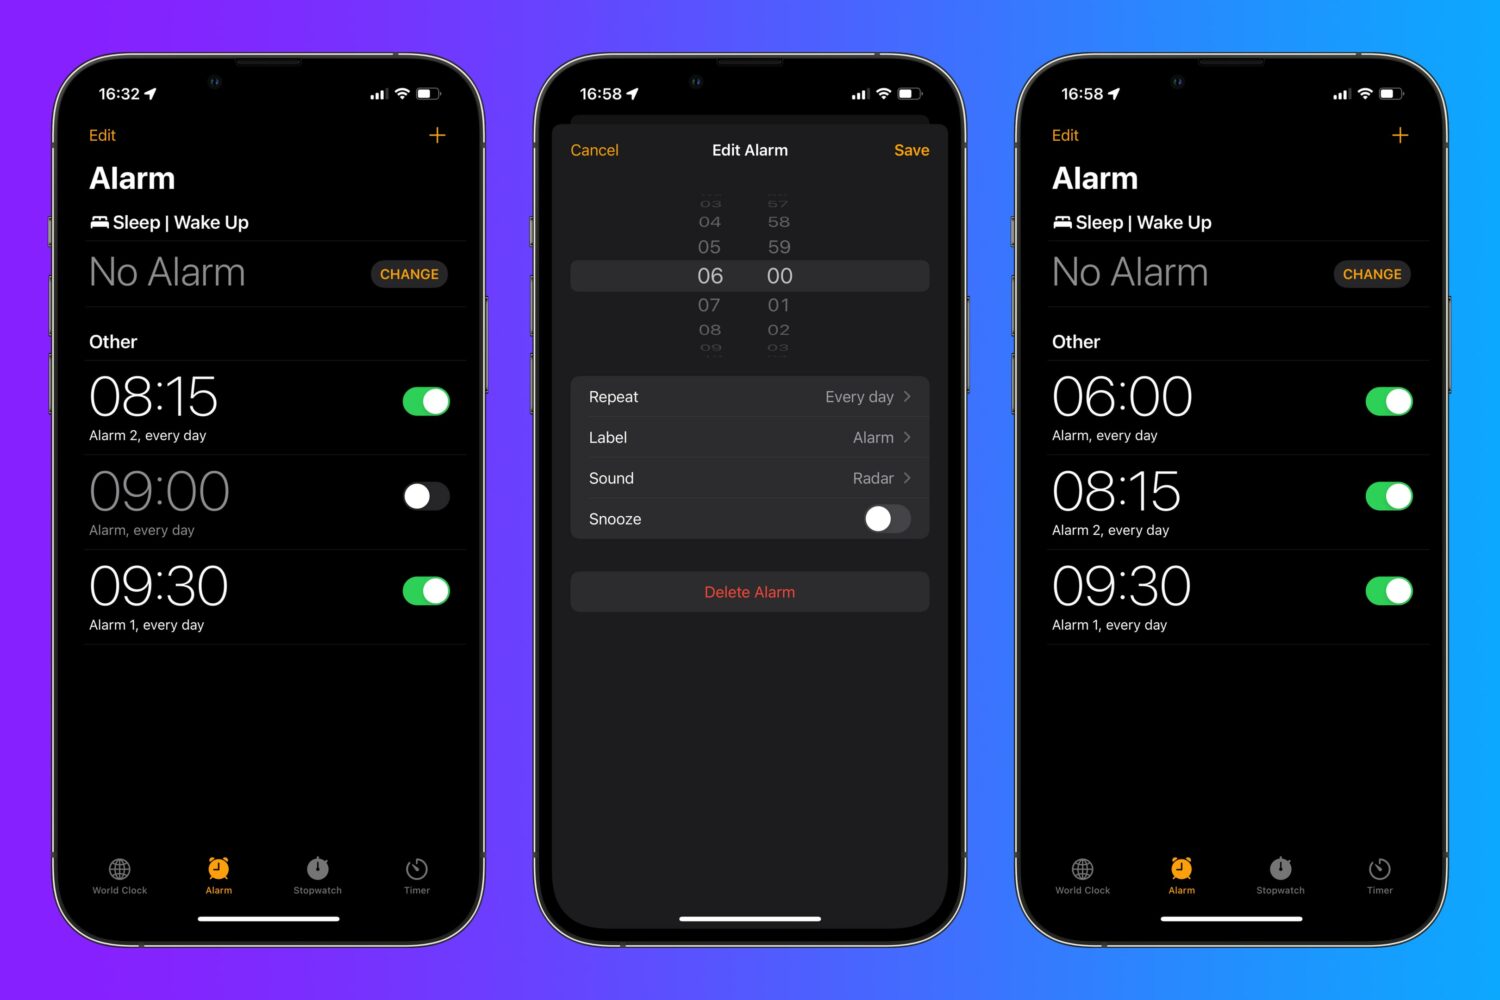 Three iPhone screenshots showing how to just edit an existing alarm without touching the Edit button first